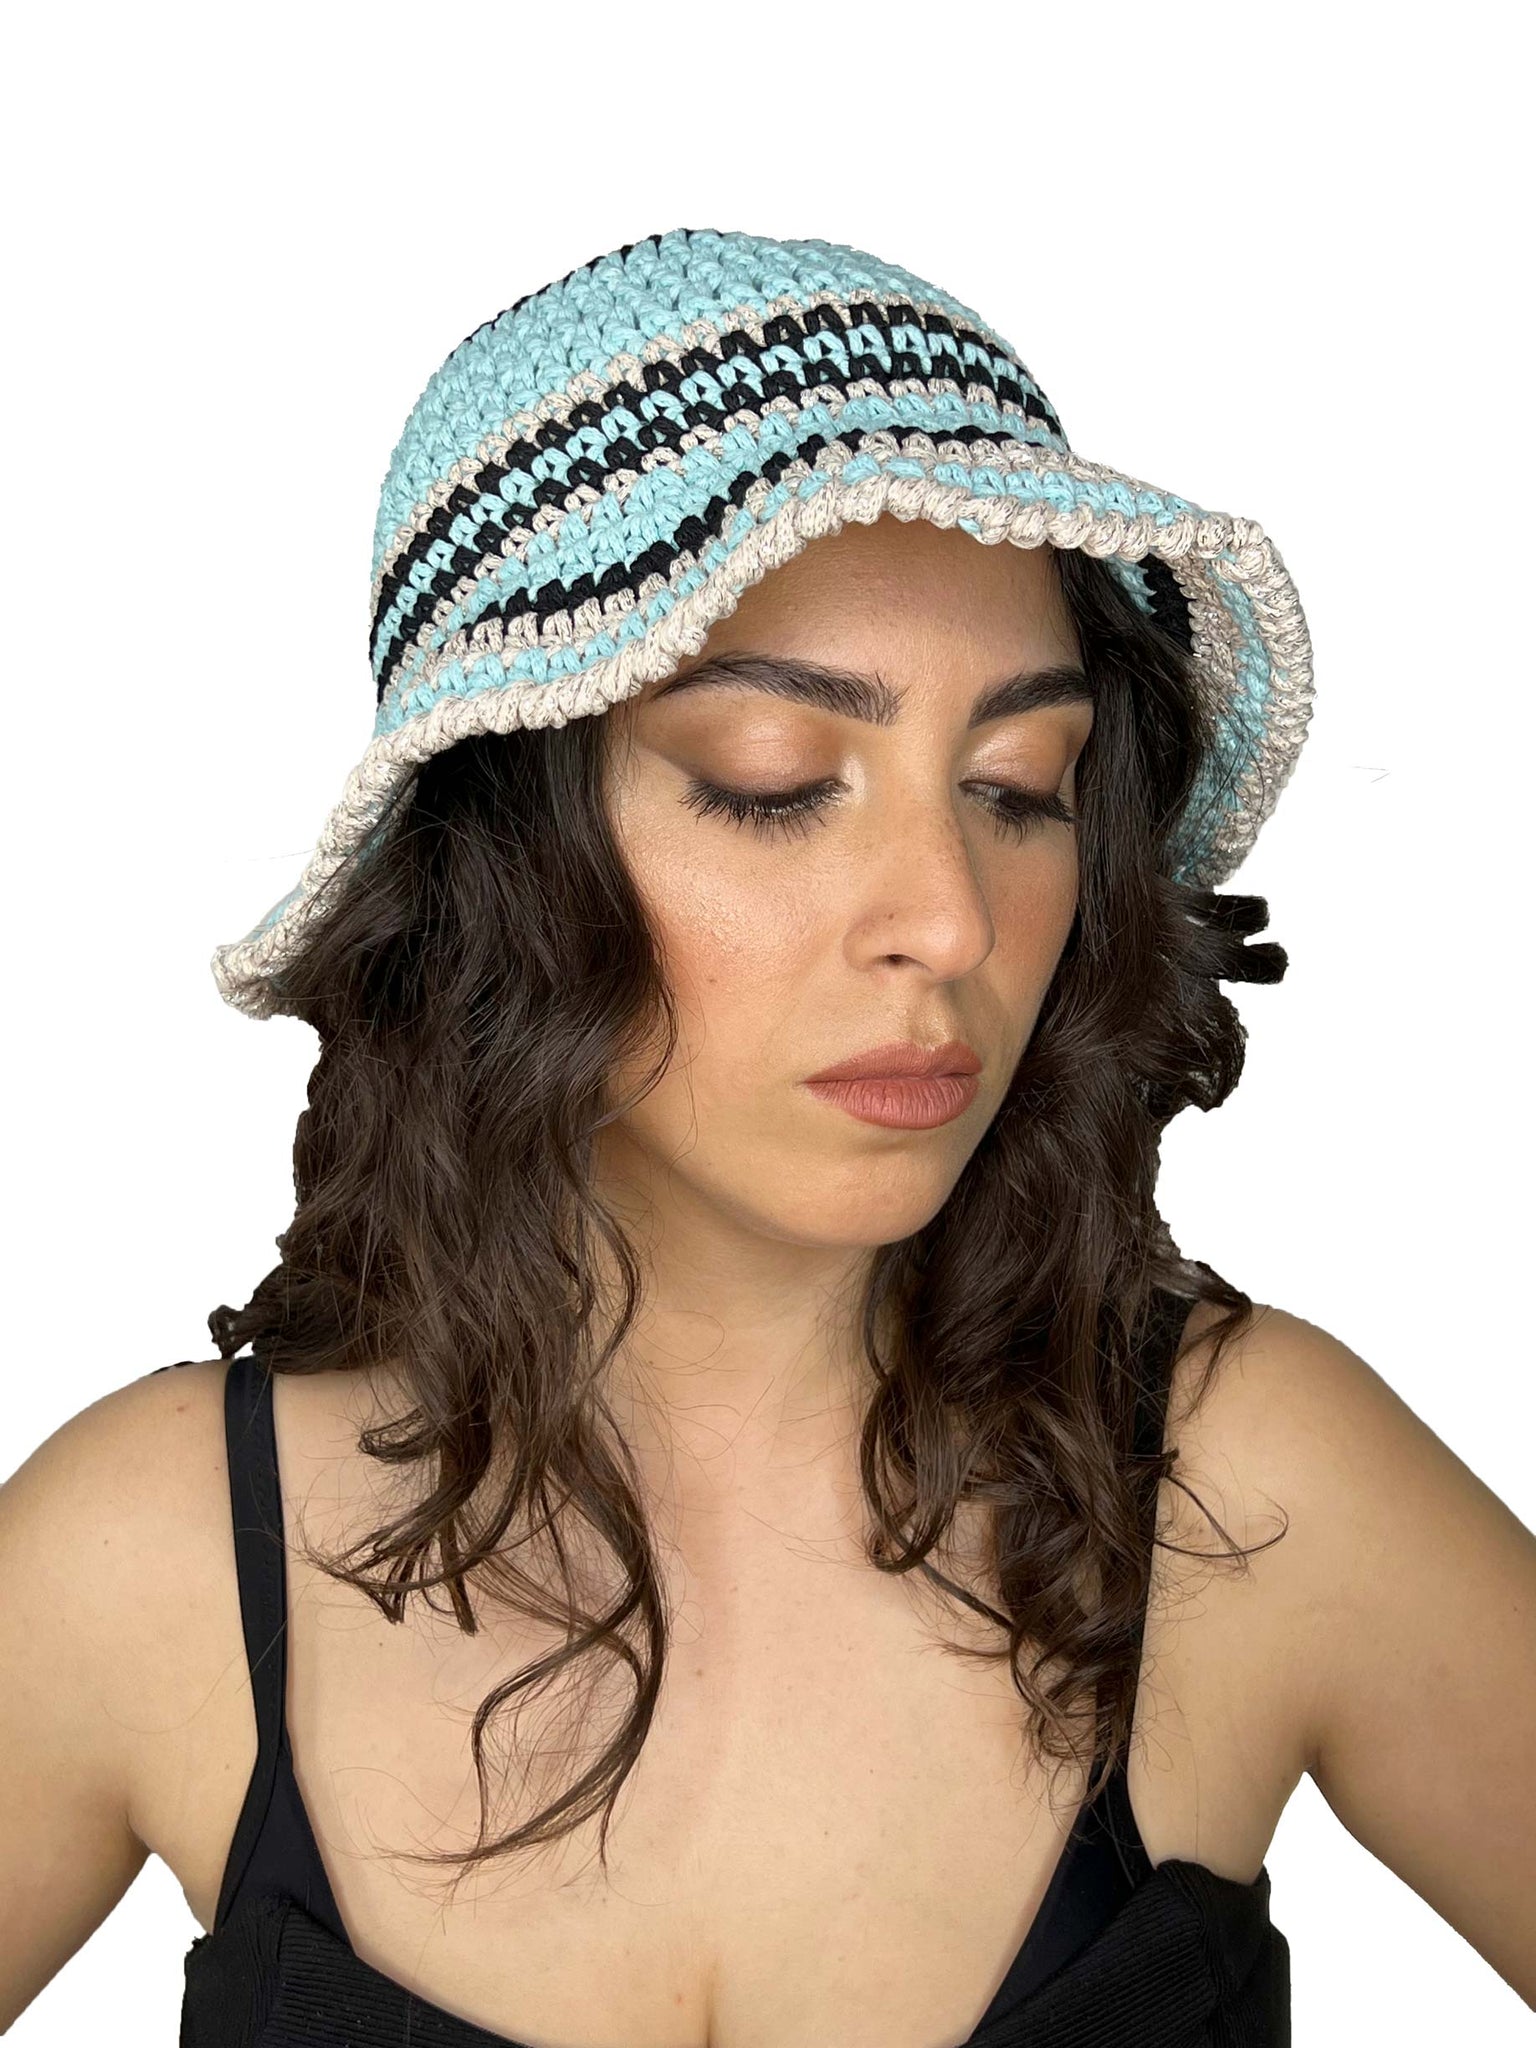 Light blue and black striped crocheted bucket hat